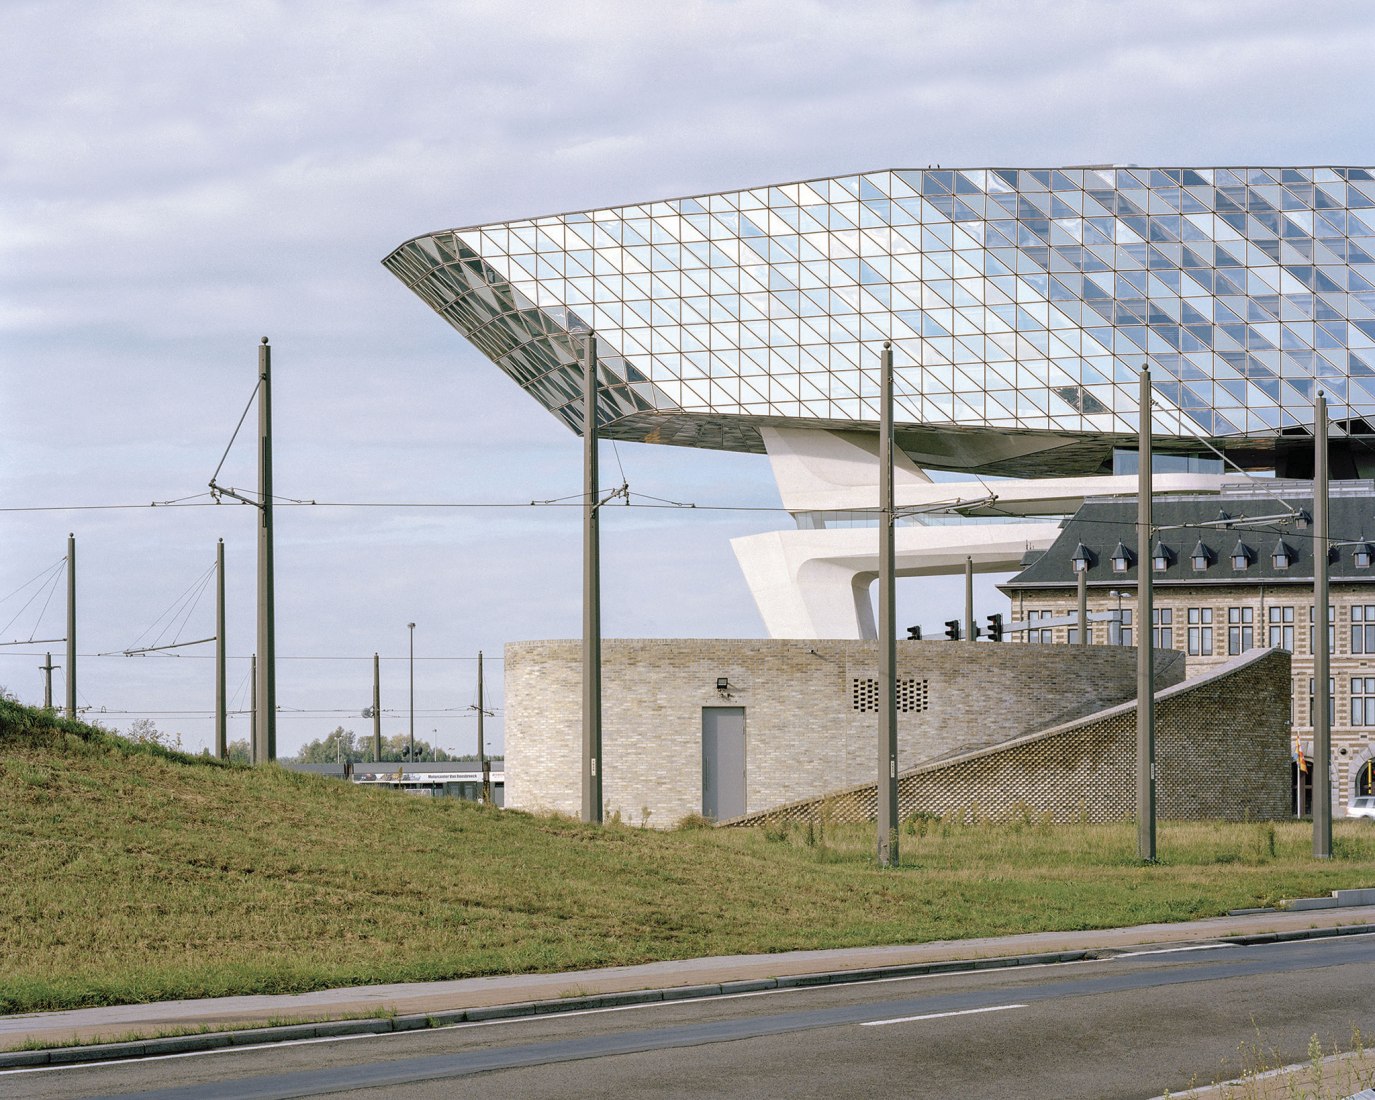 Traction Stations Brabo 2 Antwerp by Van Belle & Medina. Sraatburgbrug Station. Photograph by Maxime Delvaux